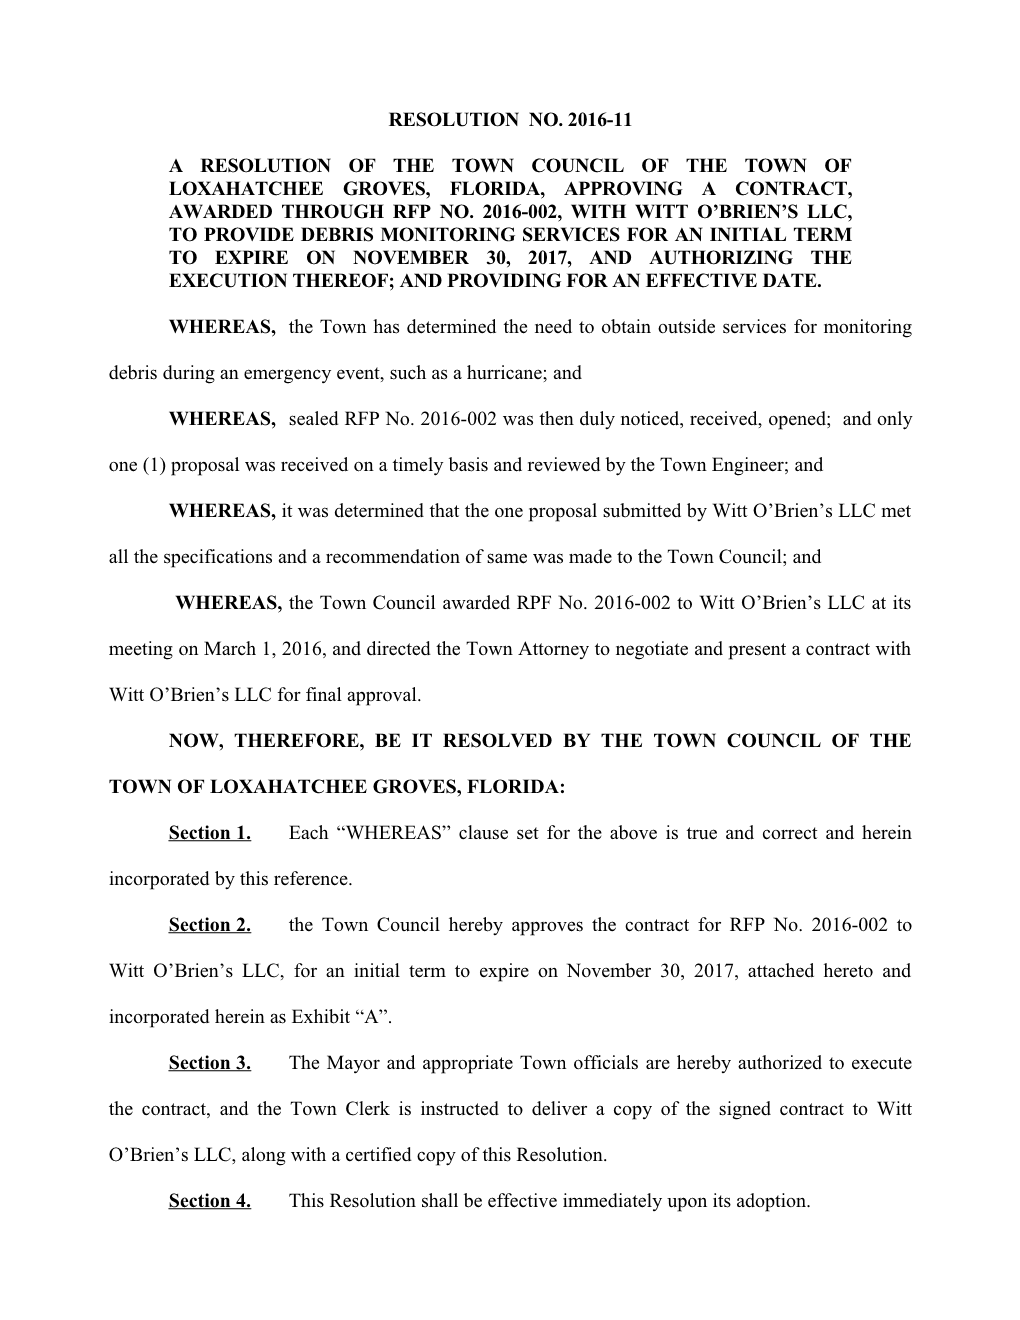 Now, Therefore, Be It Resolved by the Town Council of the Town of Loxahatchee Groves, Florida